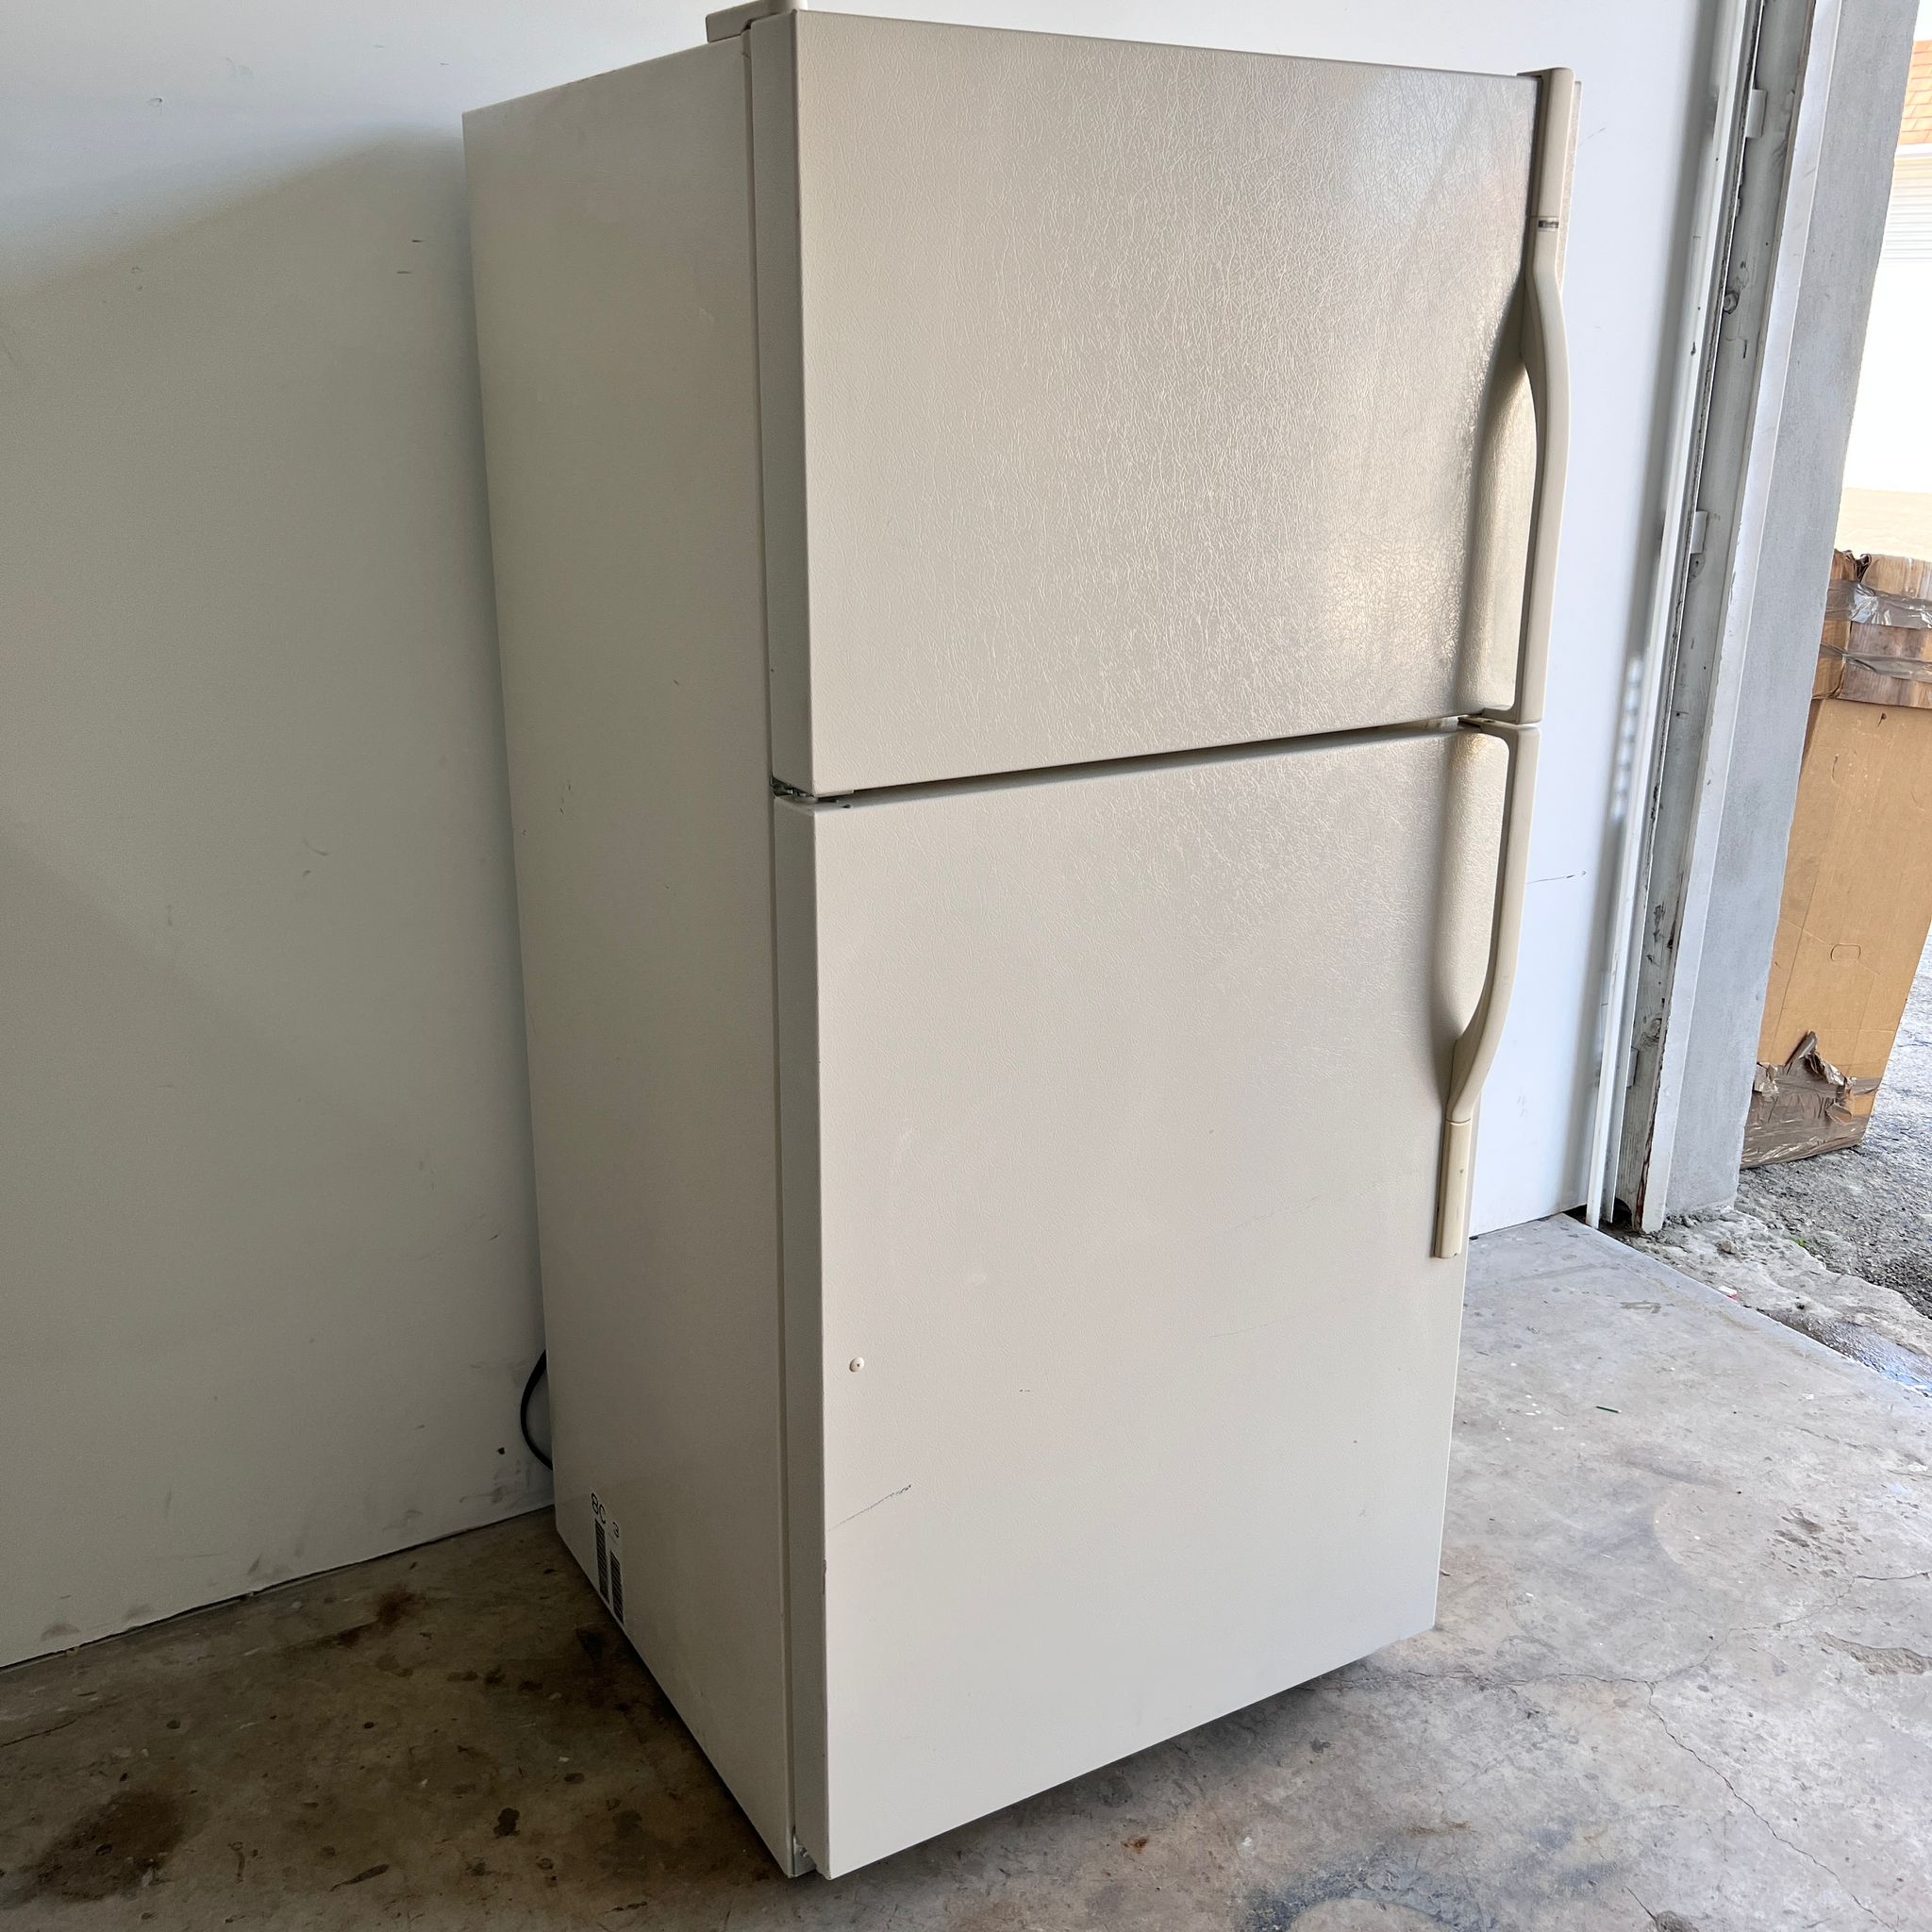 Kenmore Top and Bottom Refrigerator with Ice maker